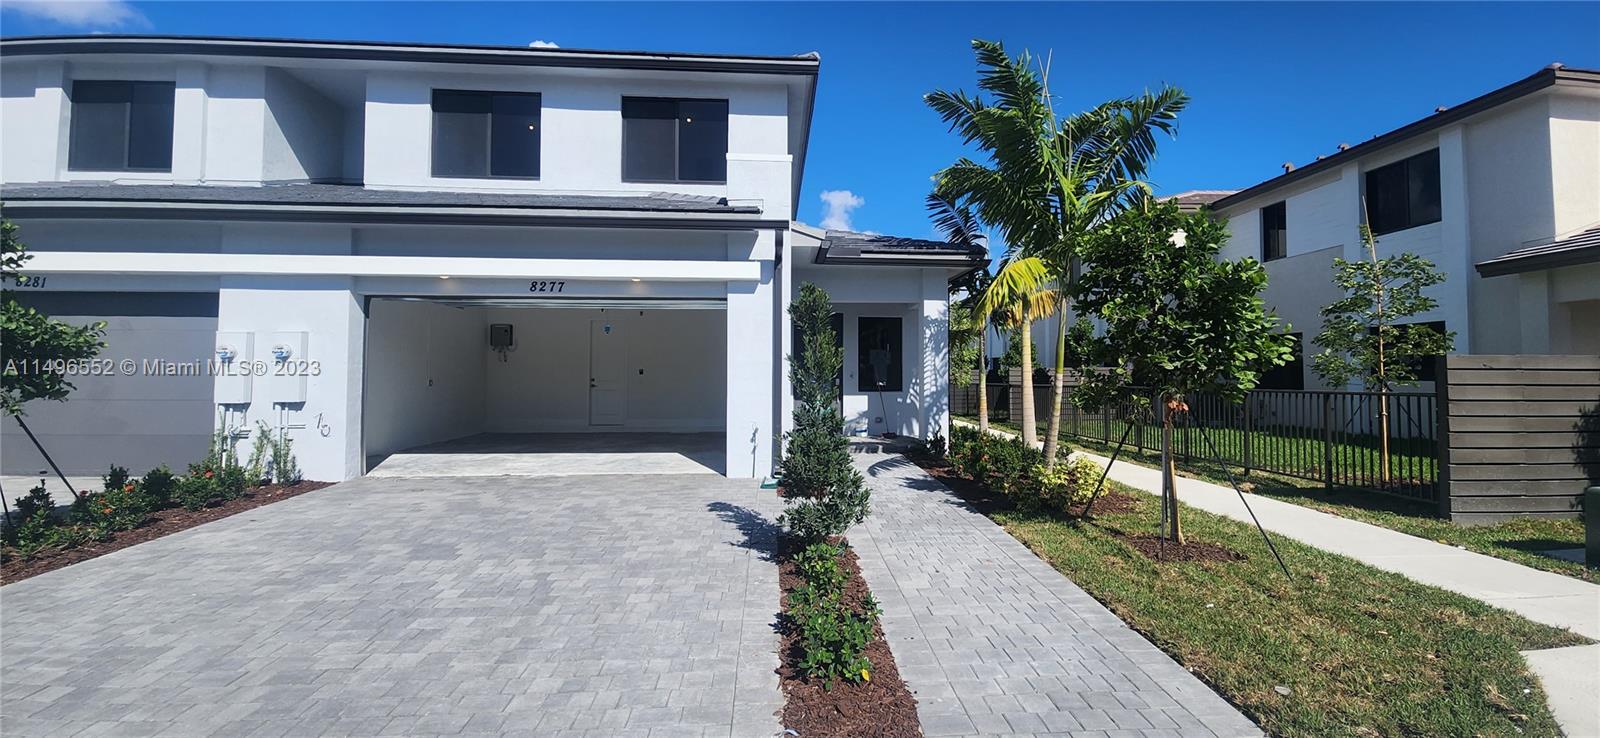 8277 SW 121th Terrace  For Sale A11496552, FL